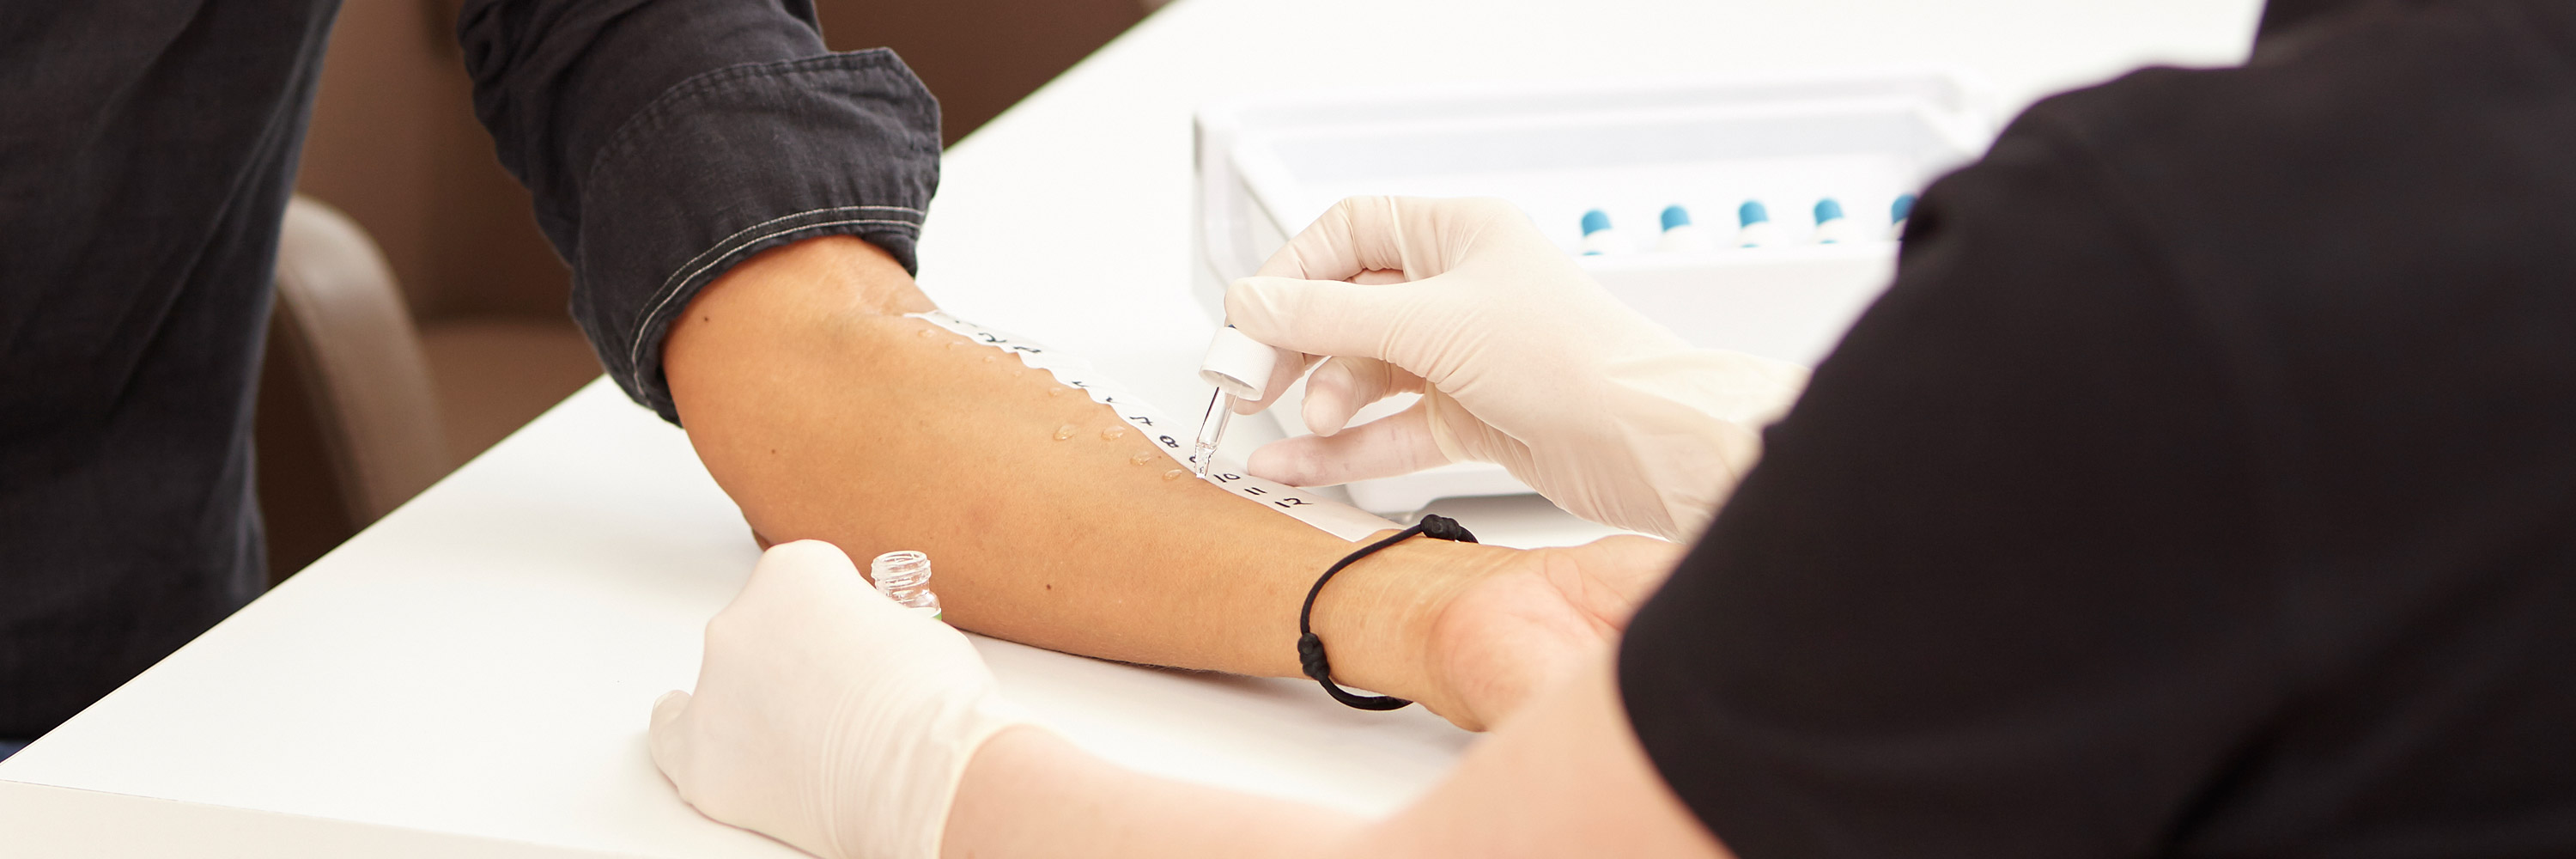 A patient undergoing an allergy test. A dermatologist's hand, wearing gloves, drips an allergen liquid onto the patient's skin. Skin reactions are used to diagnose allergies and decide on subsequent treatment methods.